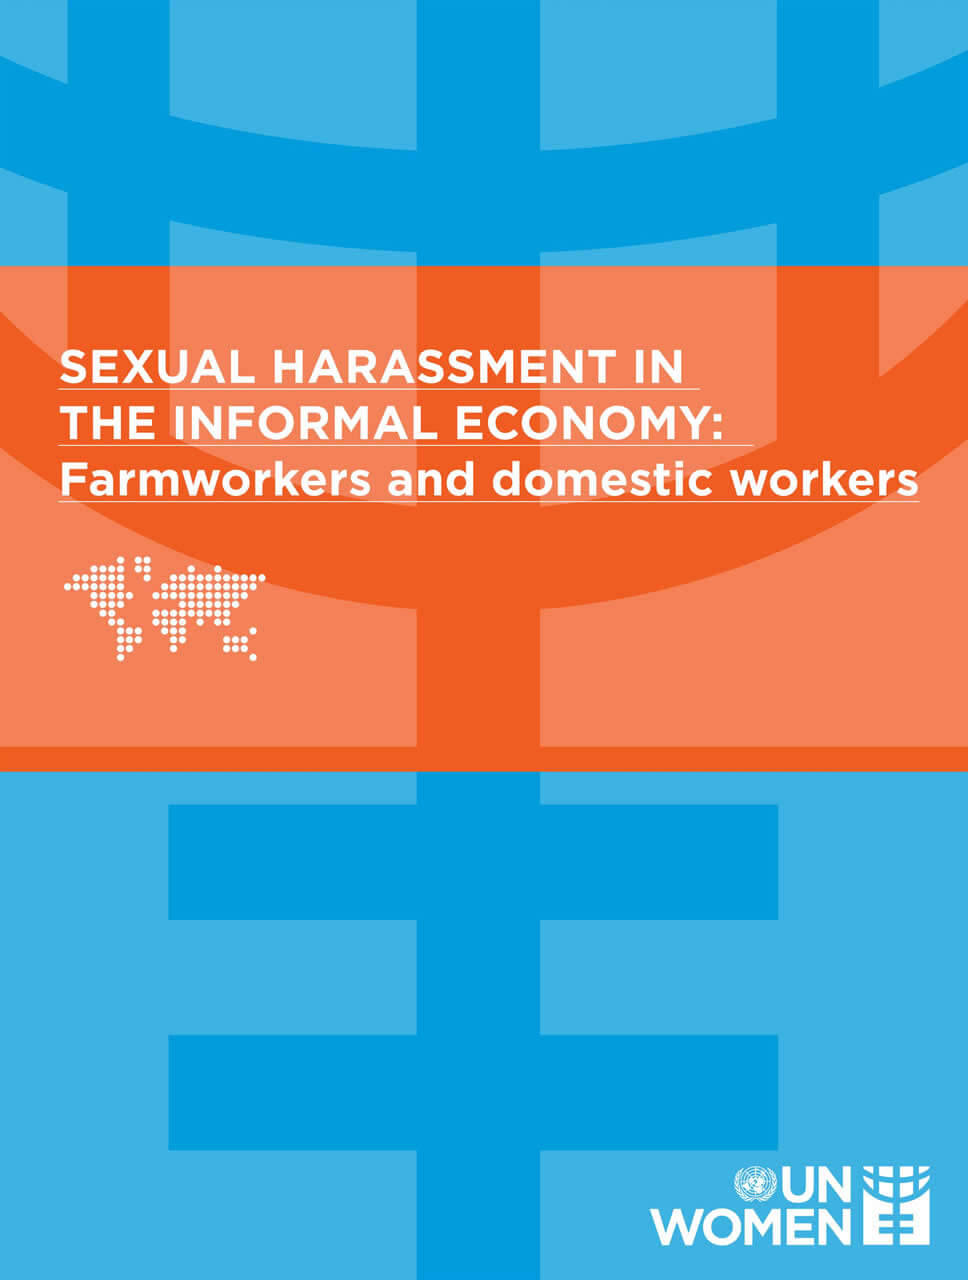 Sexual harassment in the informal economy: Farmworkers and domestic workers